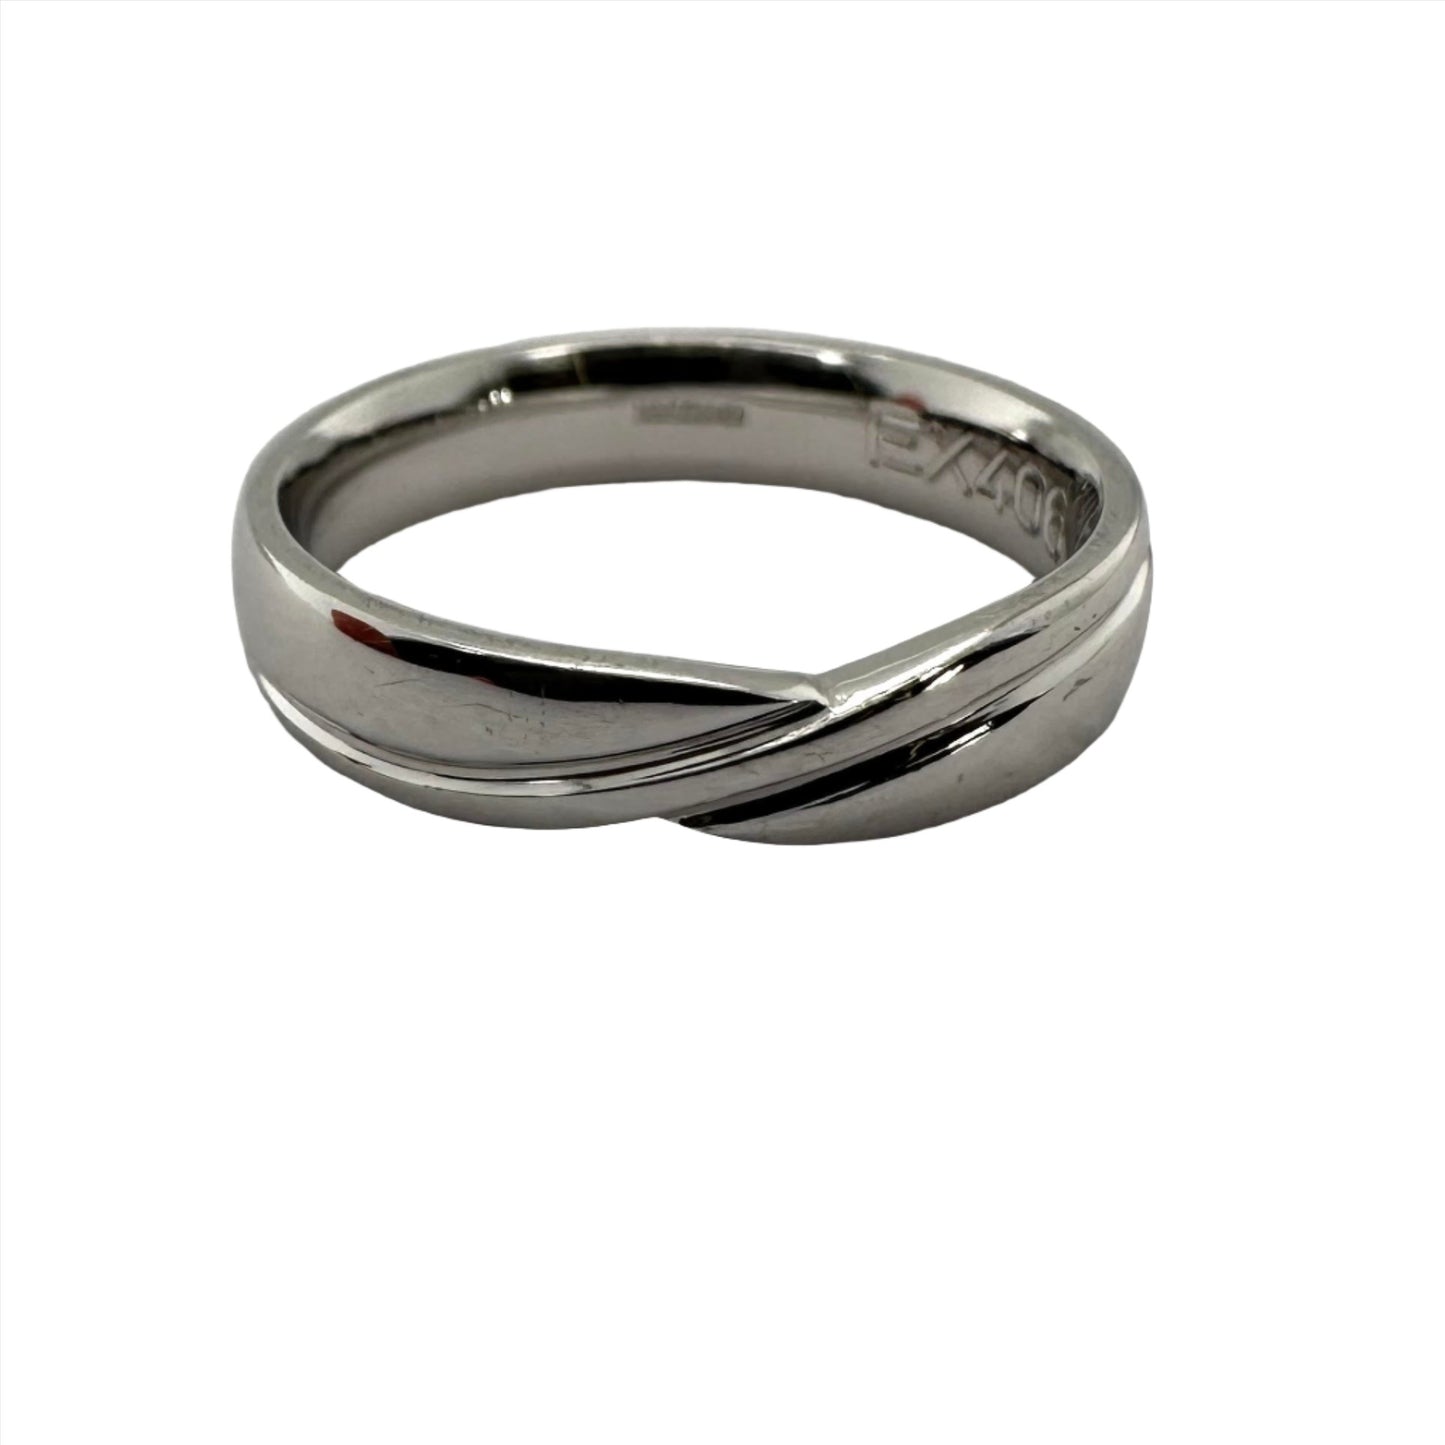 18ct white gold 4.0mm crossover style ring - polish finish.